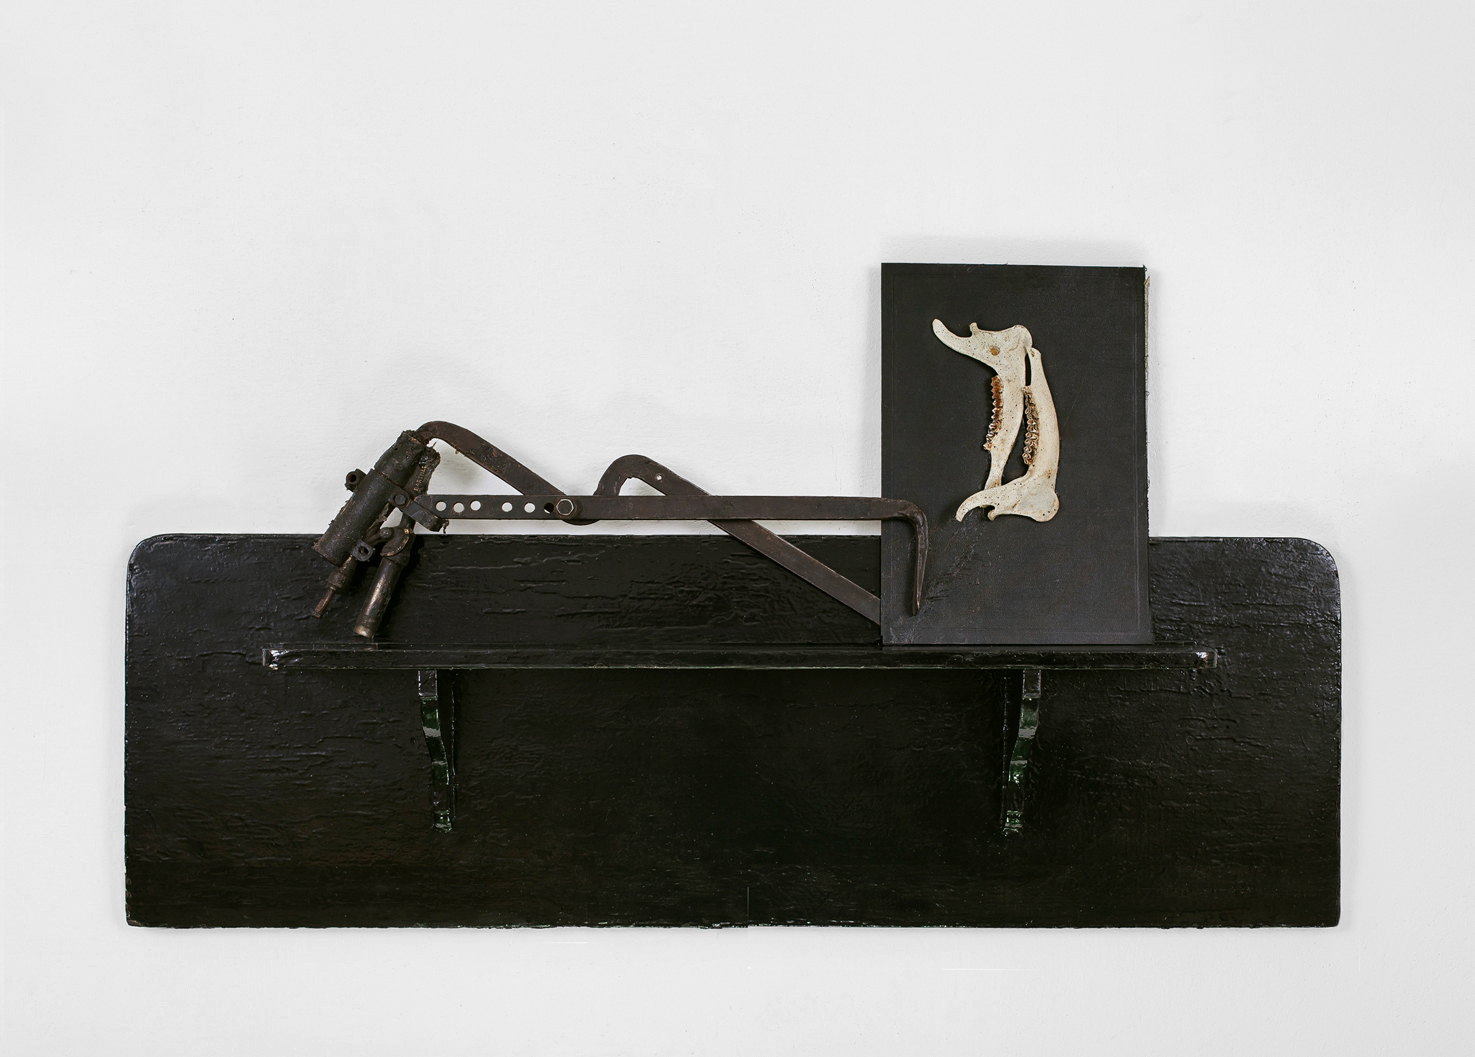 POSSESIA / Implement V / 2013 / 50 x 100 x 12 cm /
shelf, old horse anatomy atlas cover, animal mandibles, tool, machinery parts